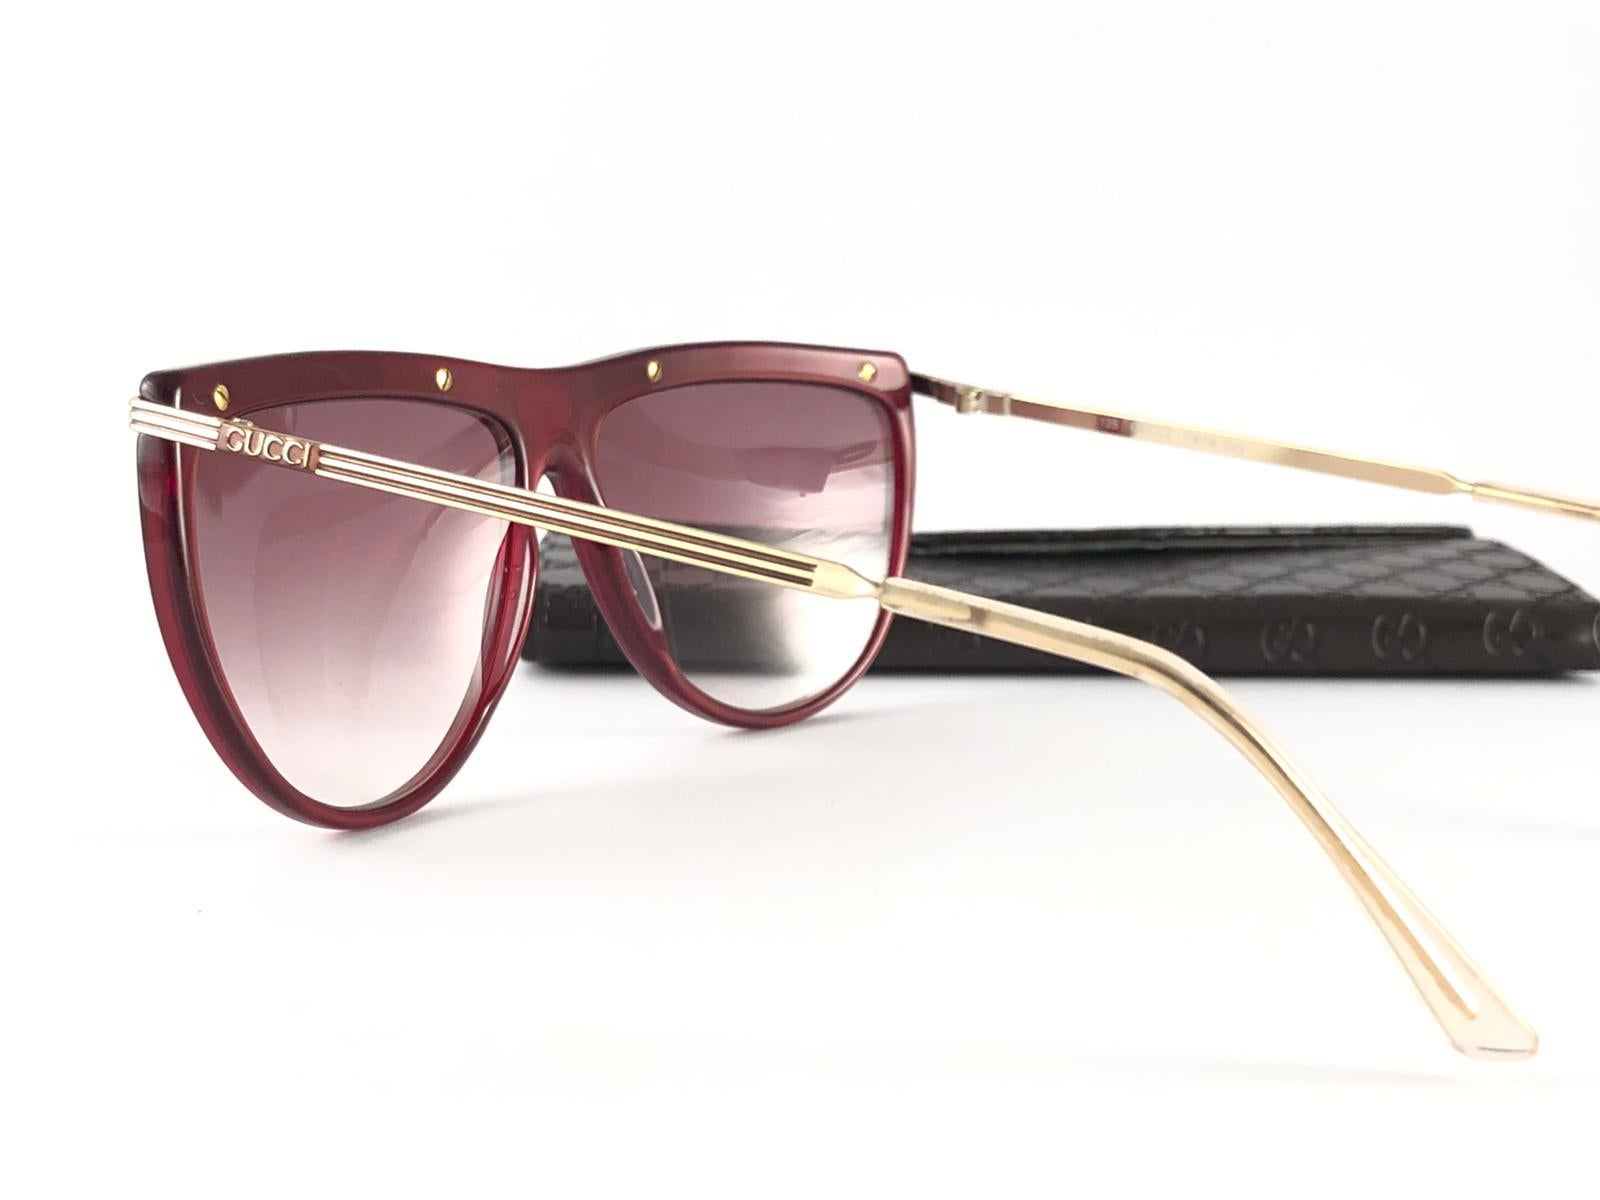 New Vintage Gucci 2303 Burgundy & Gold Accents Sunglasses 1980's Made in Italy 2